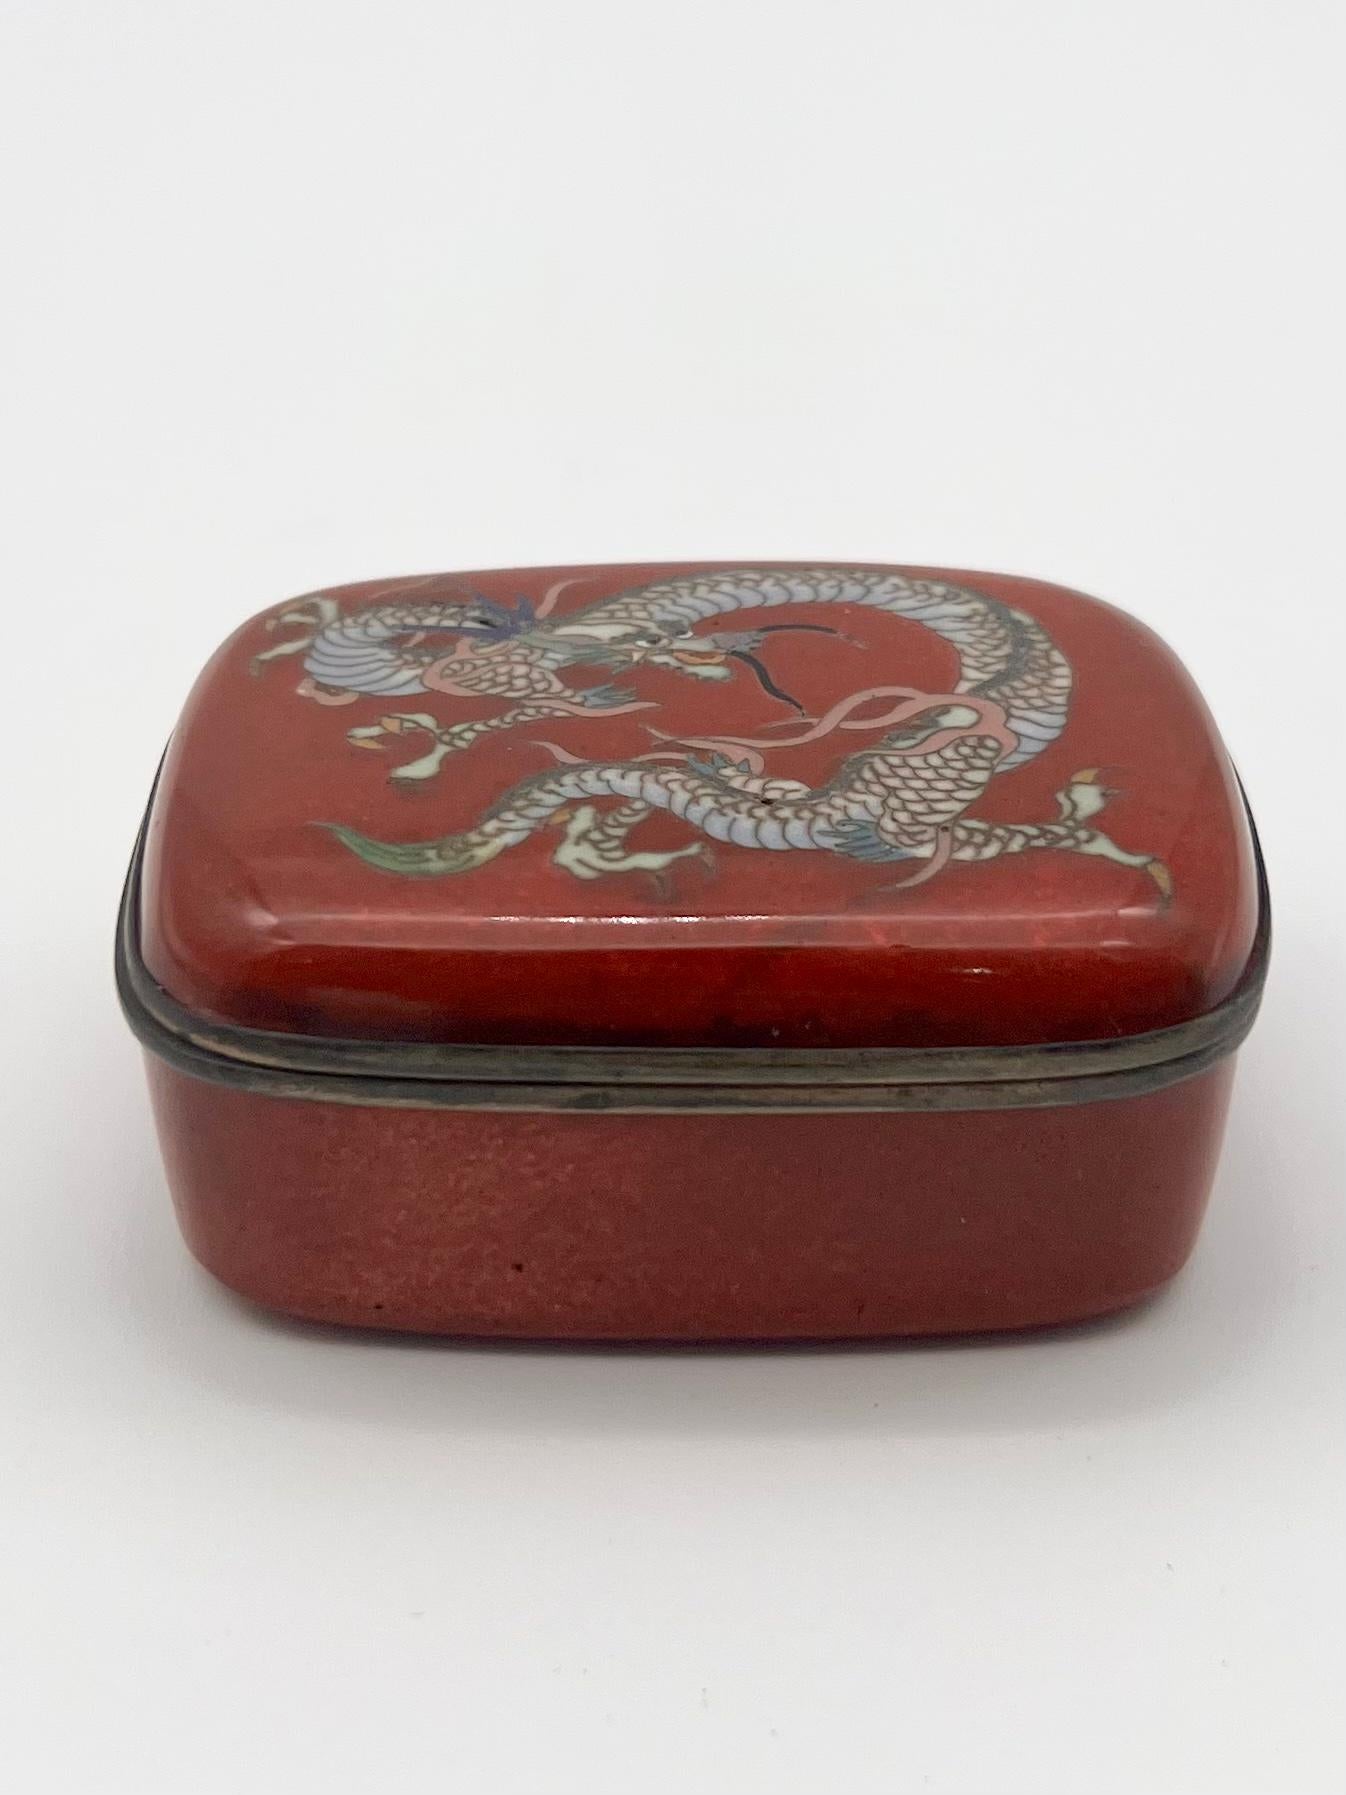 Exquisite Japanese Cloisonne Enamel Box and Cover. 19th C For Sale 4